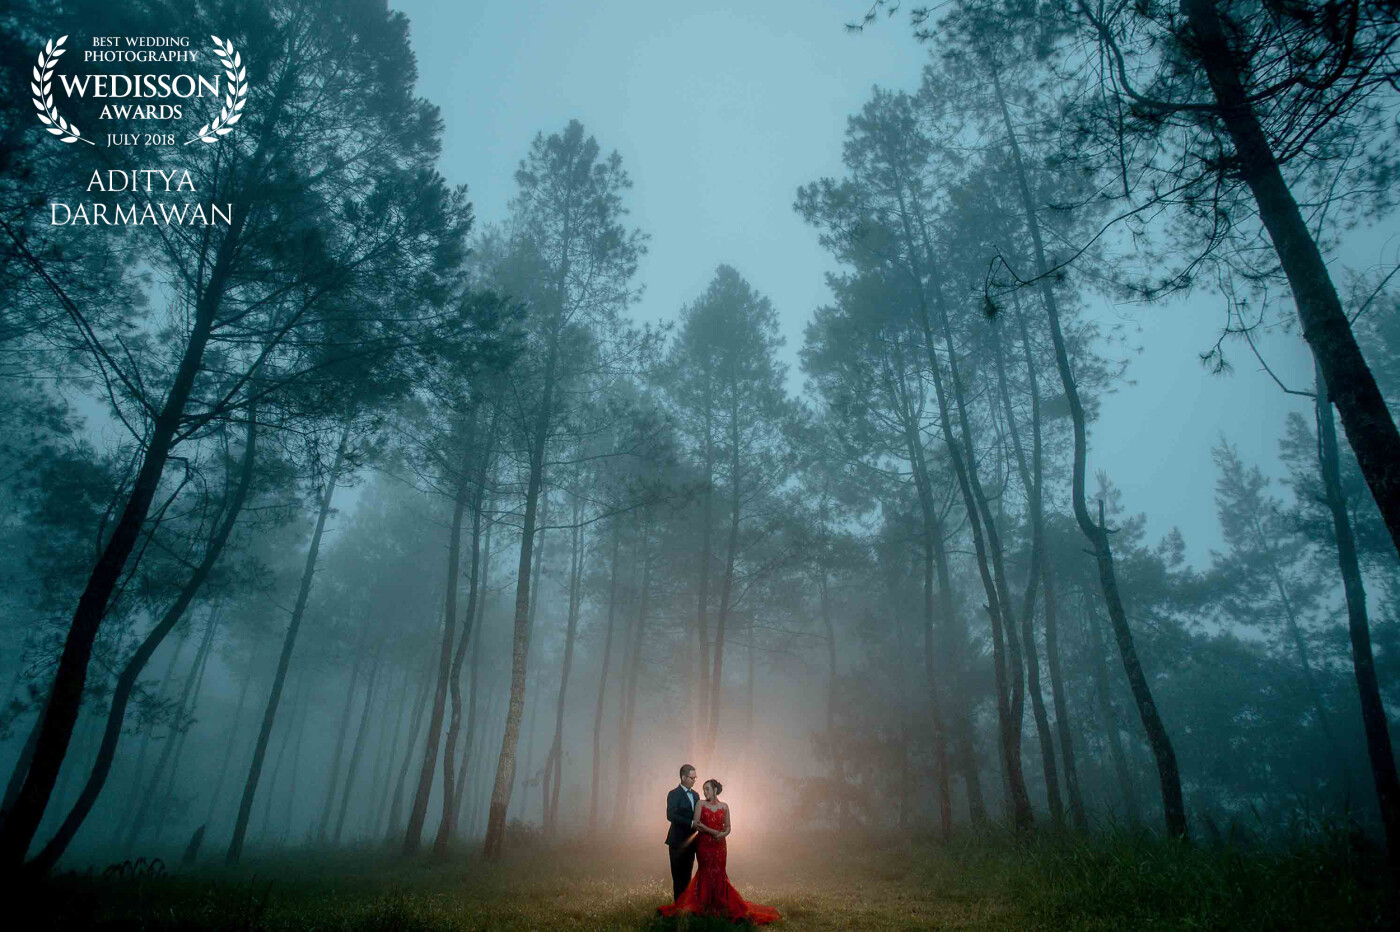 That day, I had to go out of town and woke up on early morning to photograph an engagement photo-session. Worried about a sudden rain which might cancel the outdoor session, but it turned out into something magical, the forest was covered by the thick blurry fog. Voila.